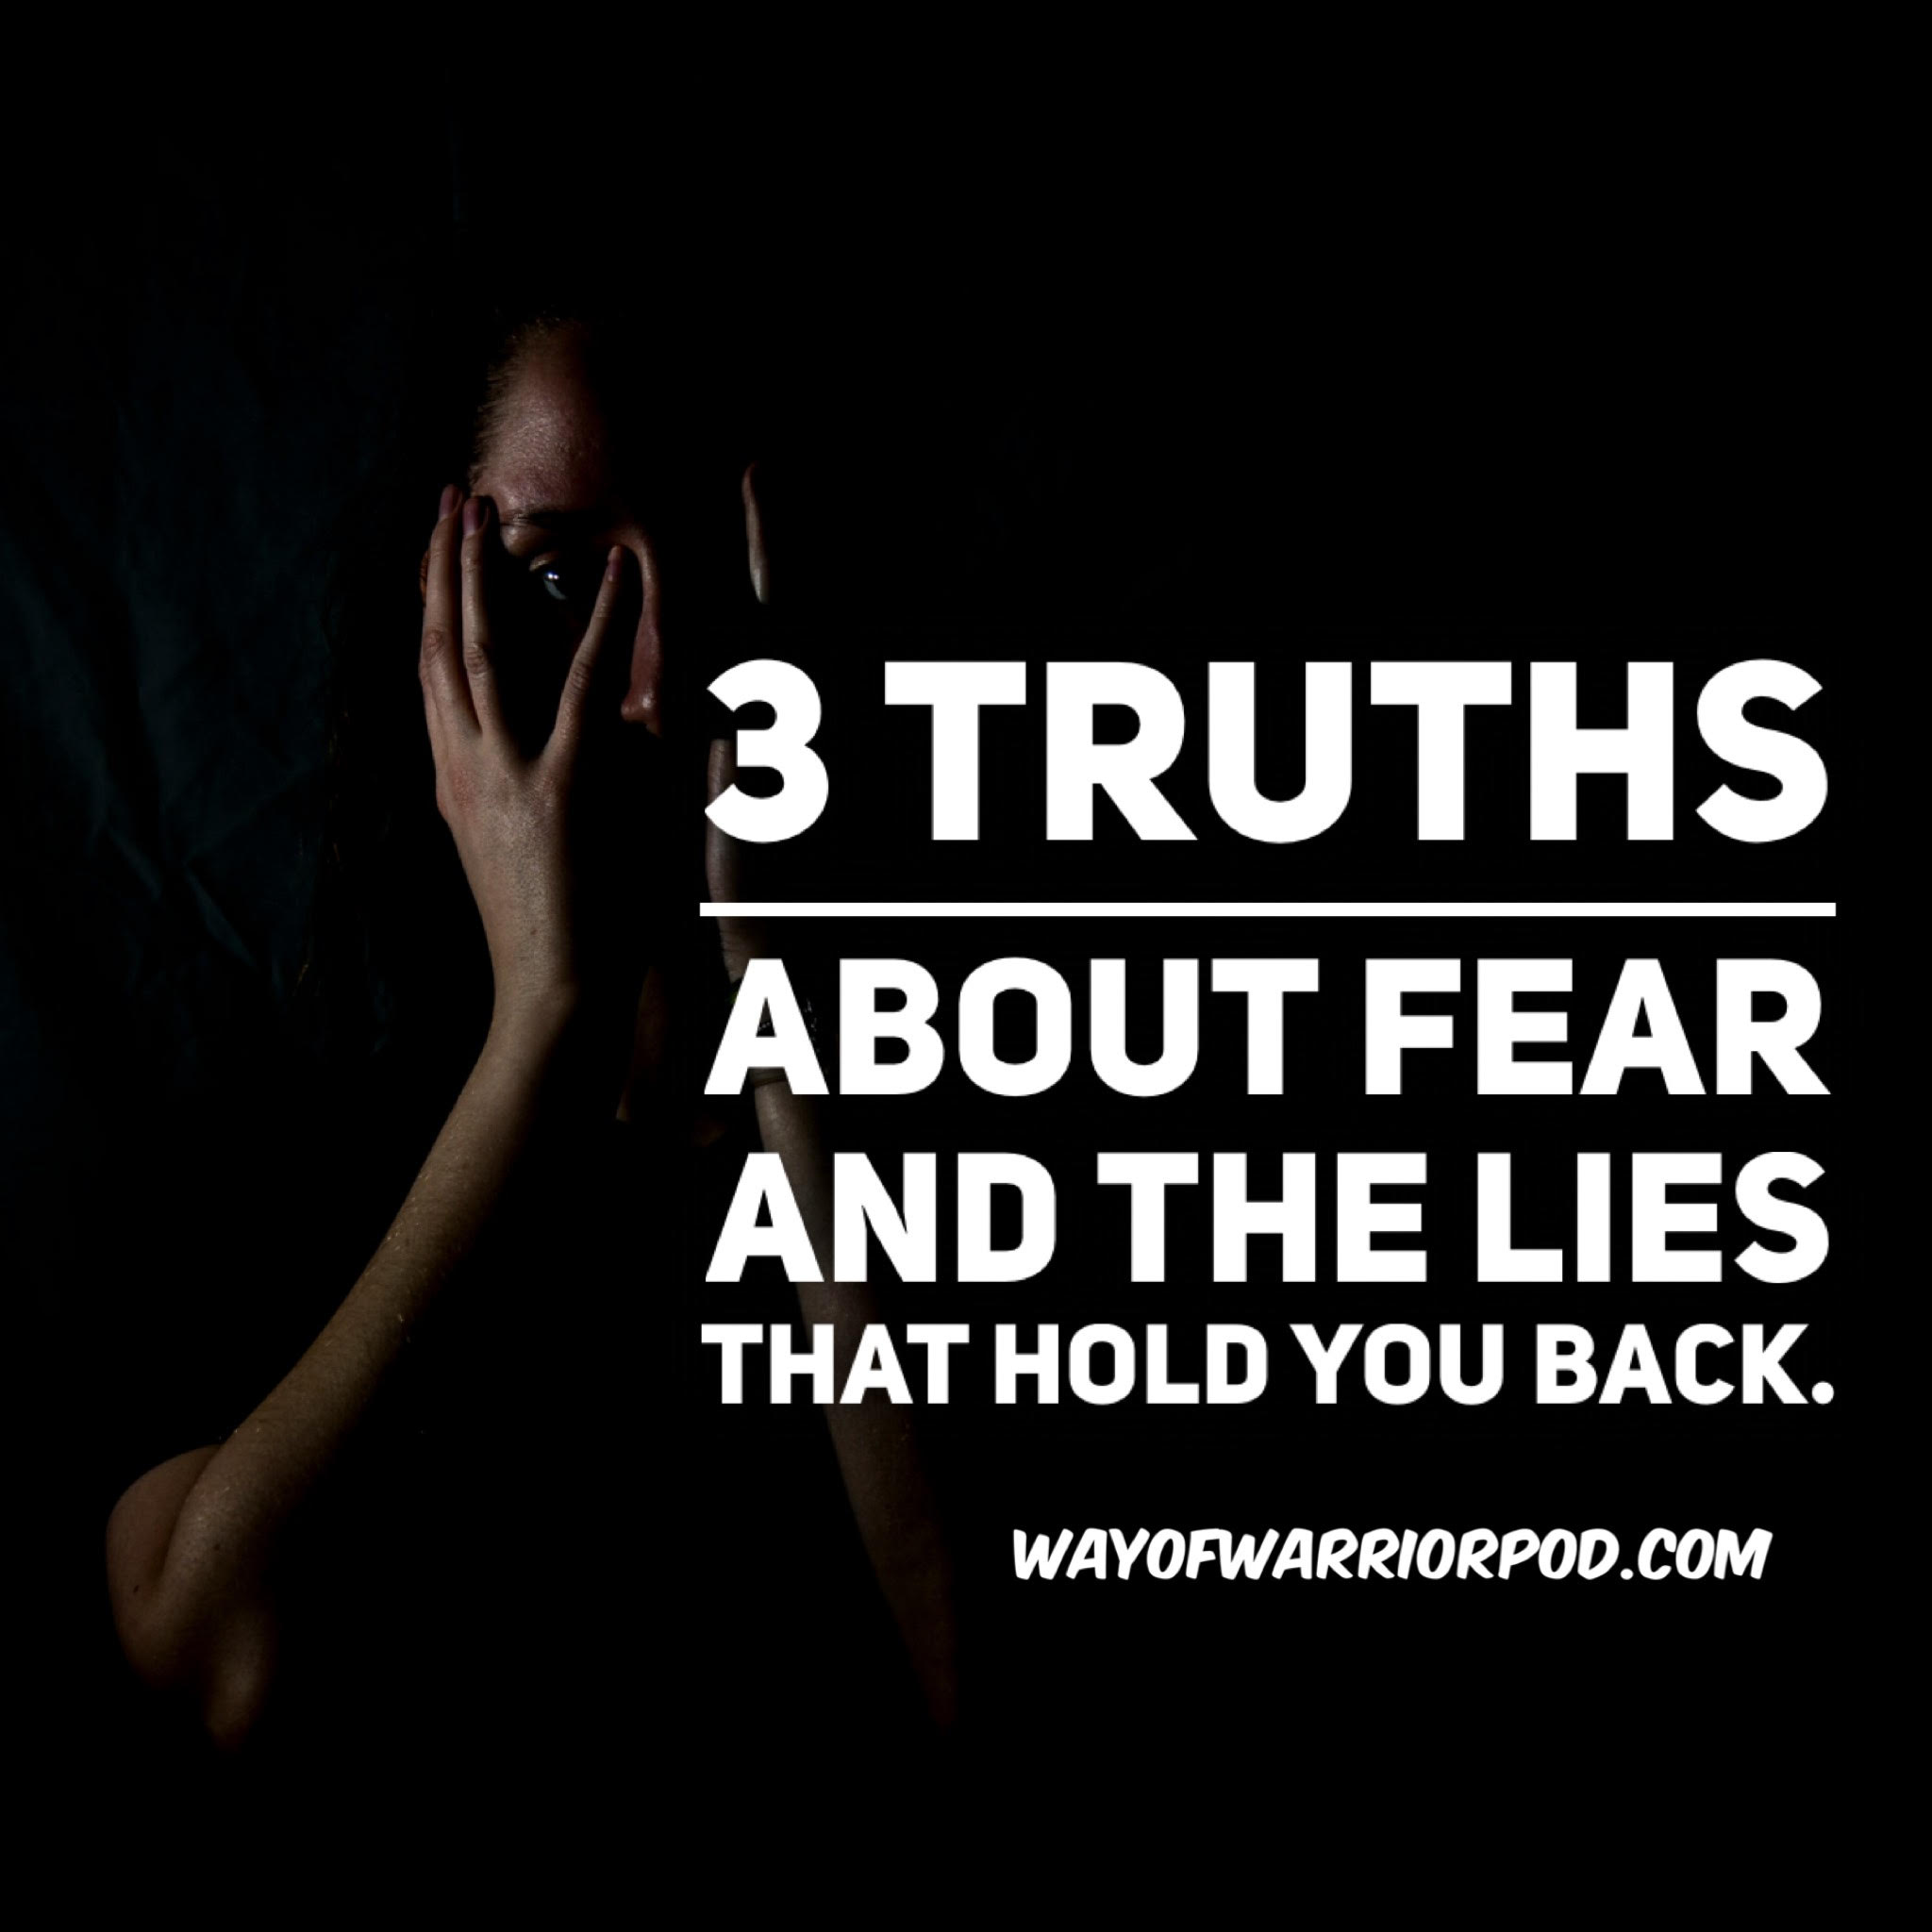 3 Truths About Fear And The Lies That Hold You Back